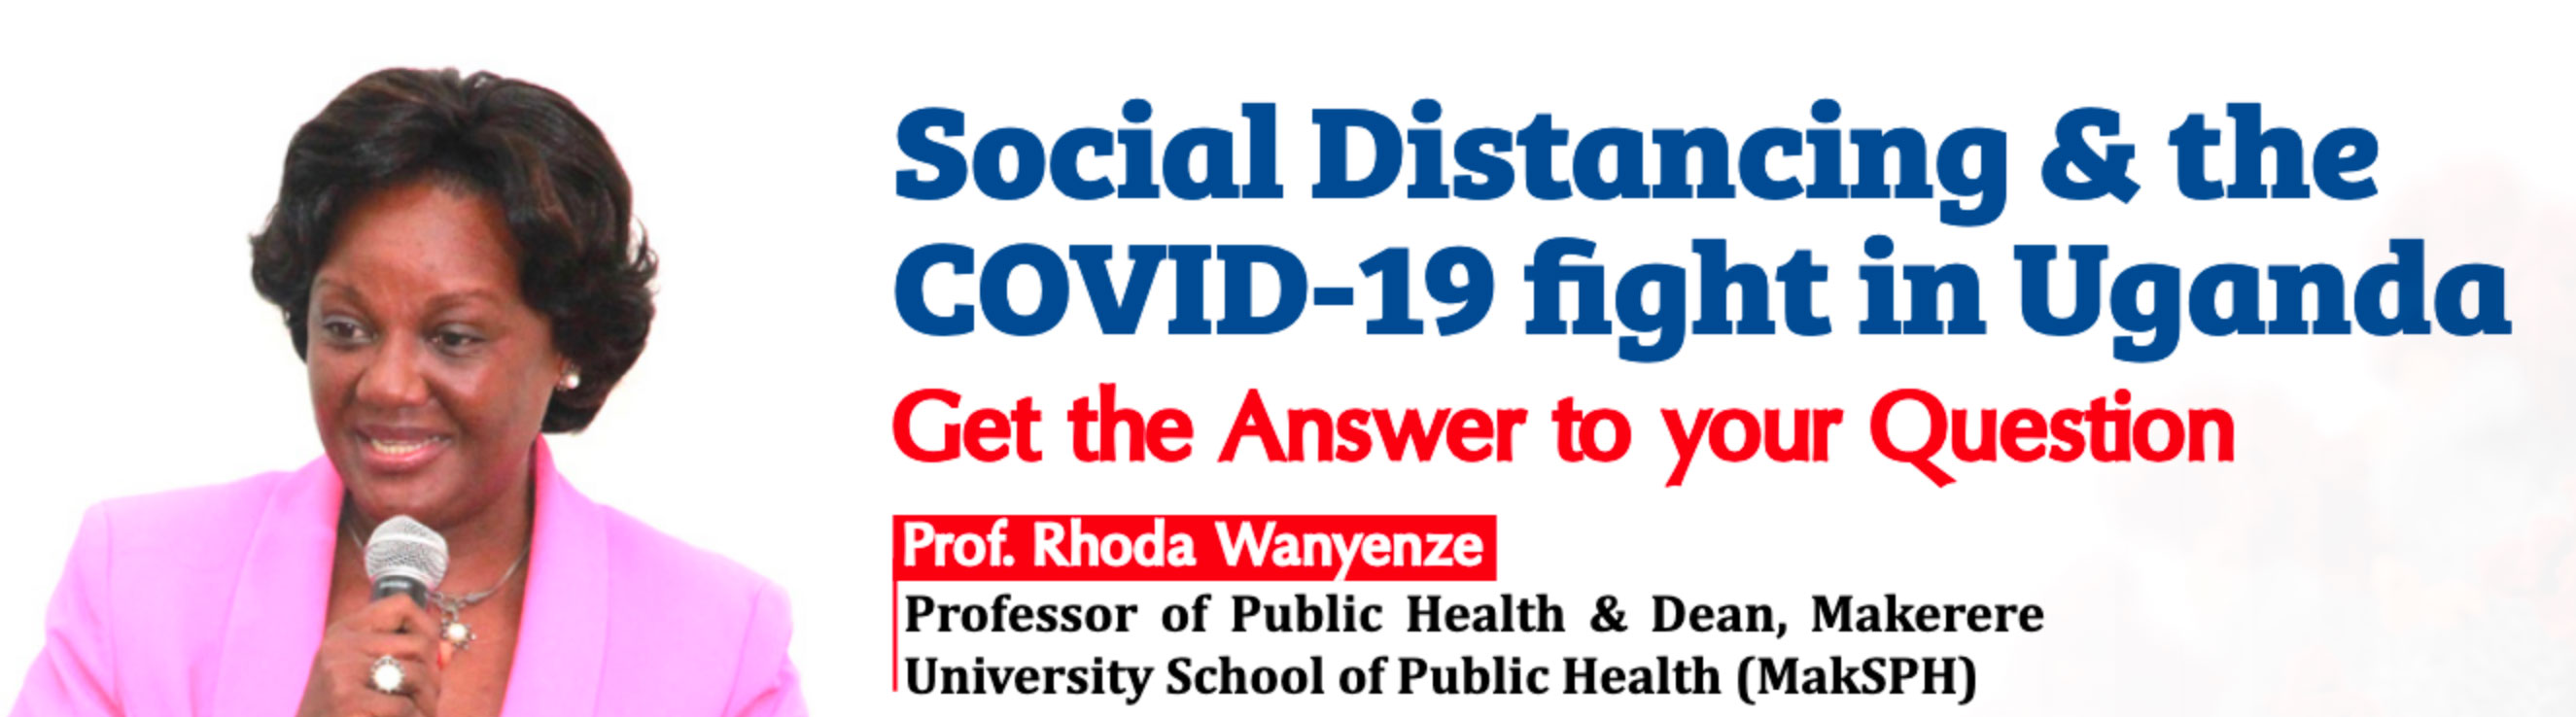 Professor Wanyenze Weighs in on Social Distancing in COVID-19 fight